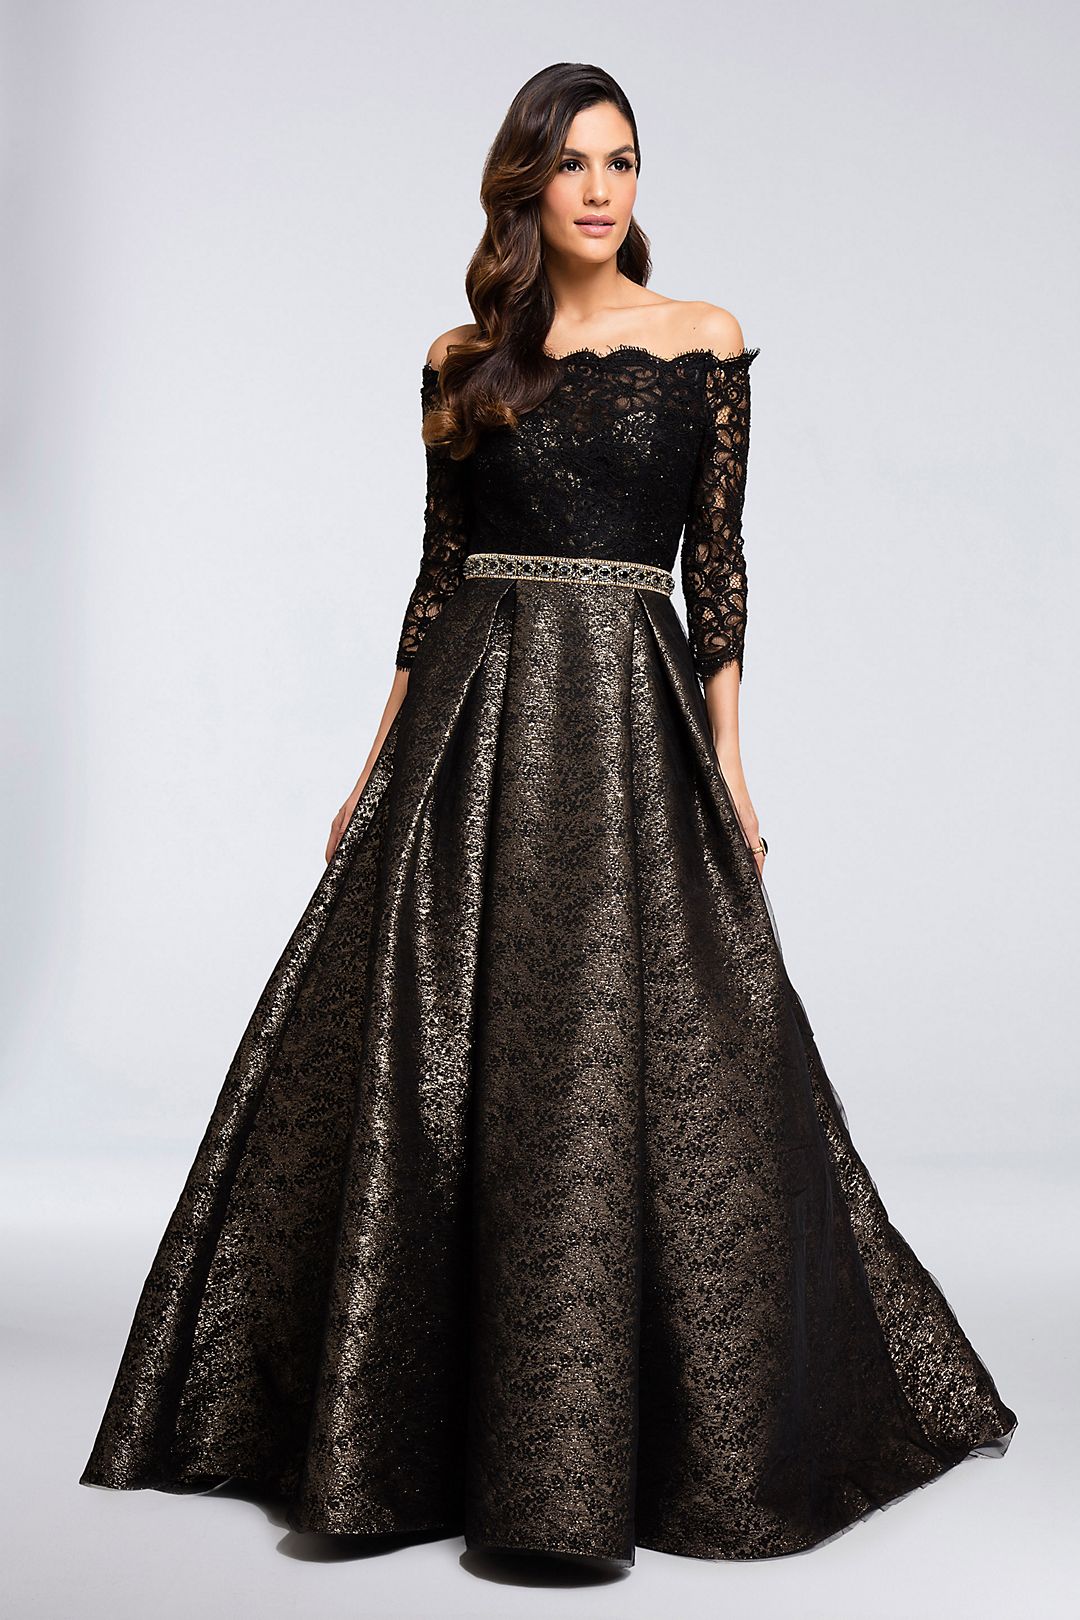 Belted Scallop Lace Ball Gown with Metallic Skirt Image 1